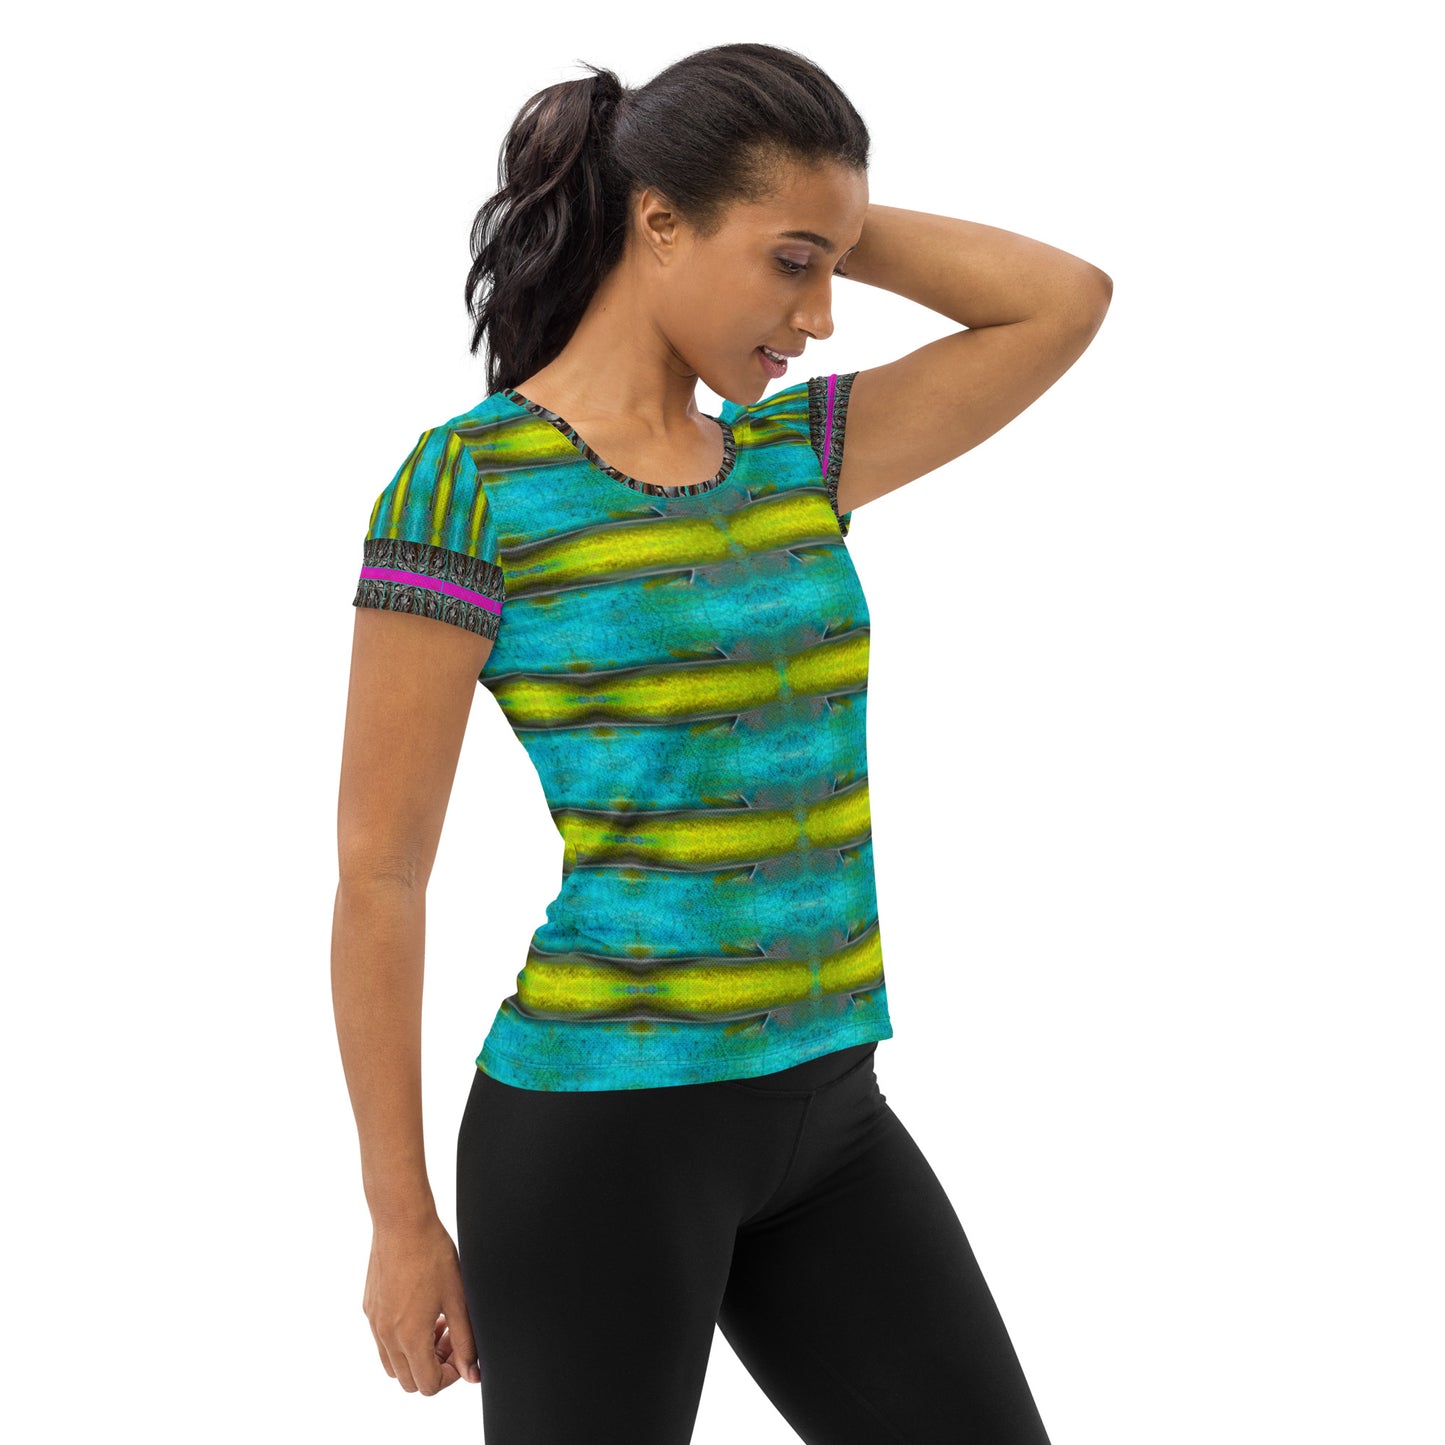 Athletic T-Shirt (Her/They)(Tree Link Stripe) RJSTH@Fabric#8 RJSTHS2021 RJS